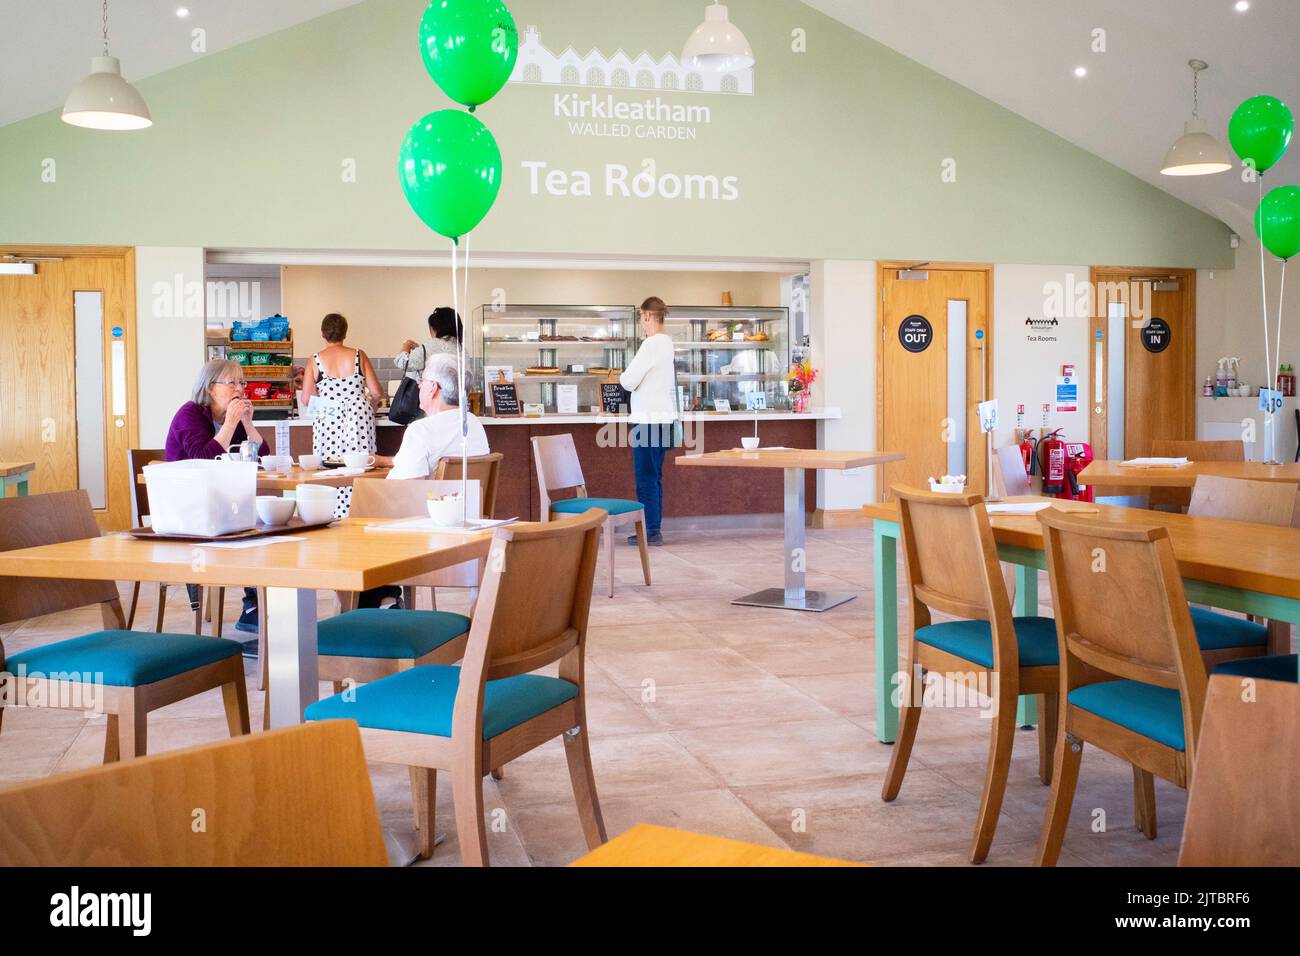 Kirkleatham tea room with green ballons celebrating 1st anniversary of first opening Stock Photo